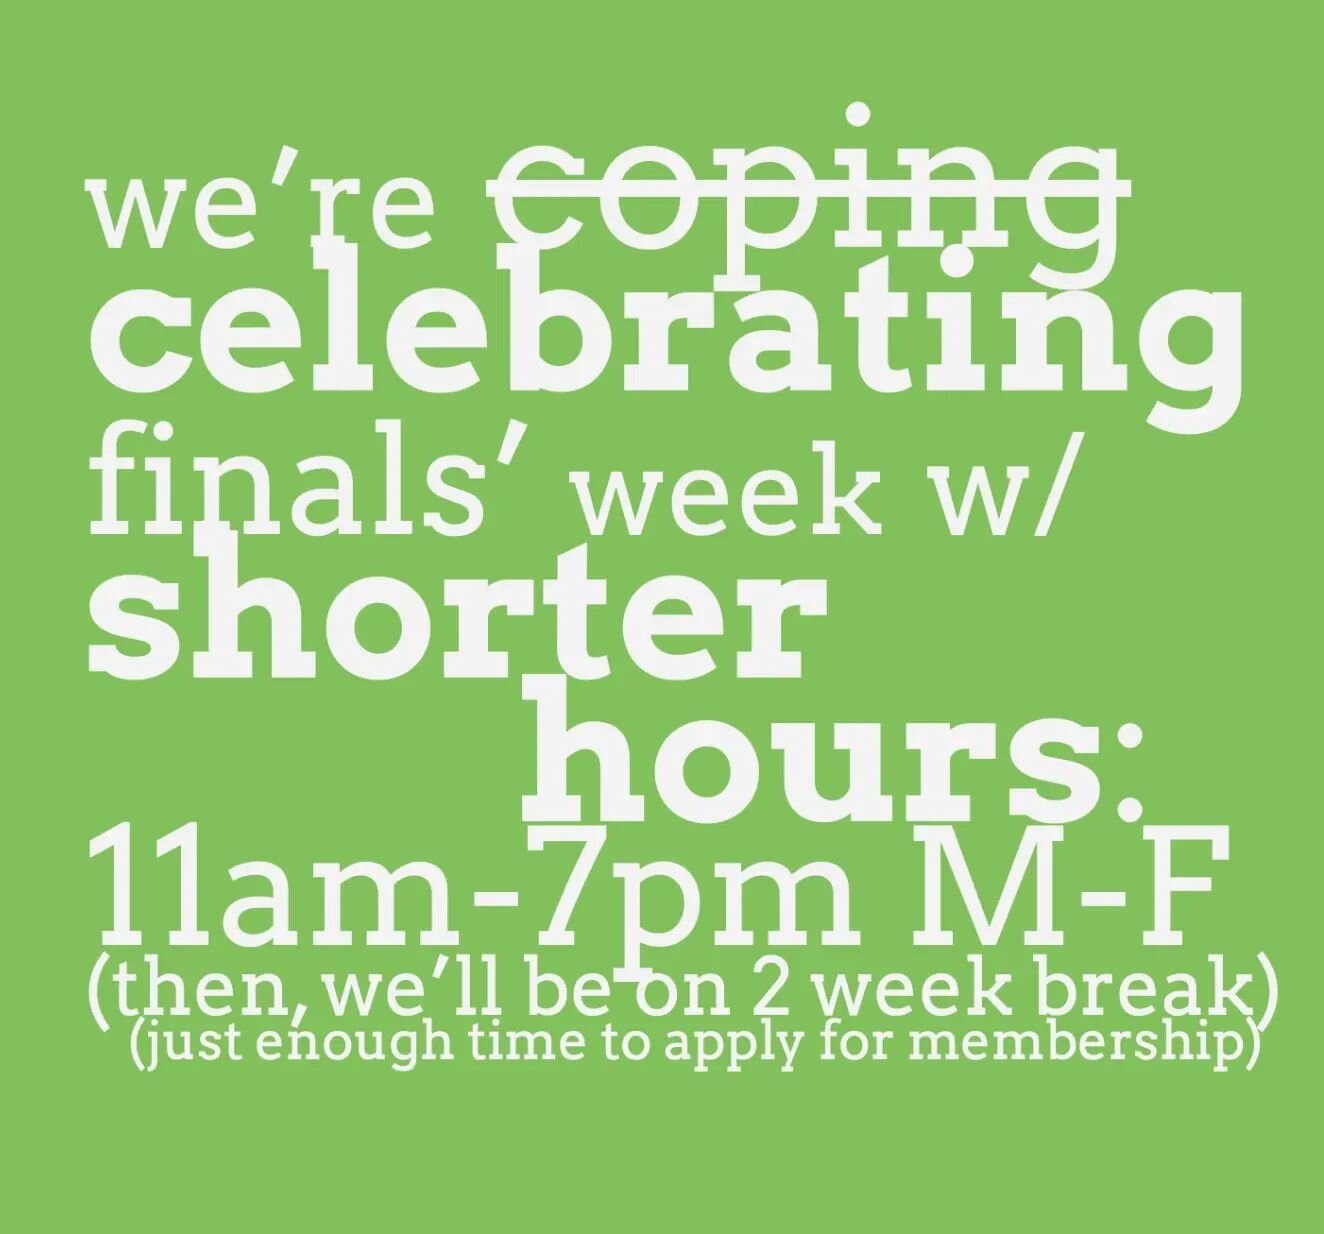 we're c̶o̶p̶i̶n̶g̶ THRIVING, CELEBRATING, &amp; LIVE LAUGH LOVING thru finals week with shorter hours &amp; reduced stock...but some great deals. 11am-7pm this week before we close for a 2 week break &mdash; just enough time to ace your finals, move 